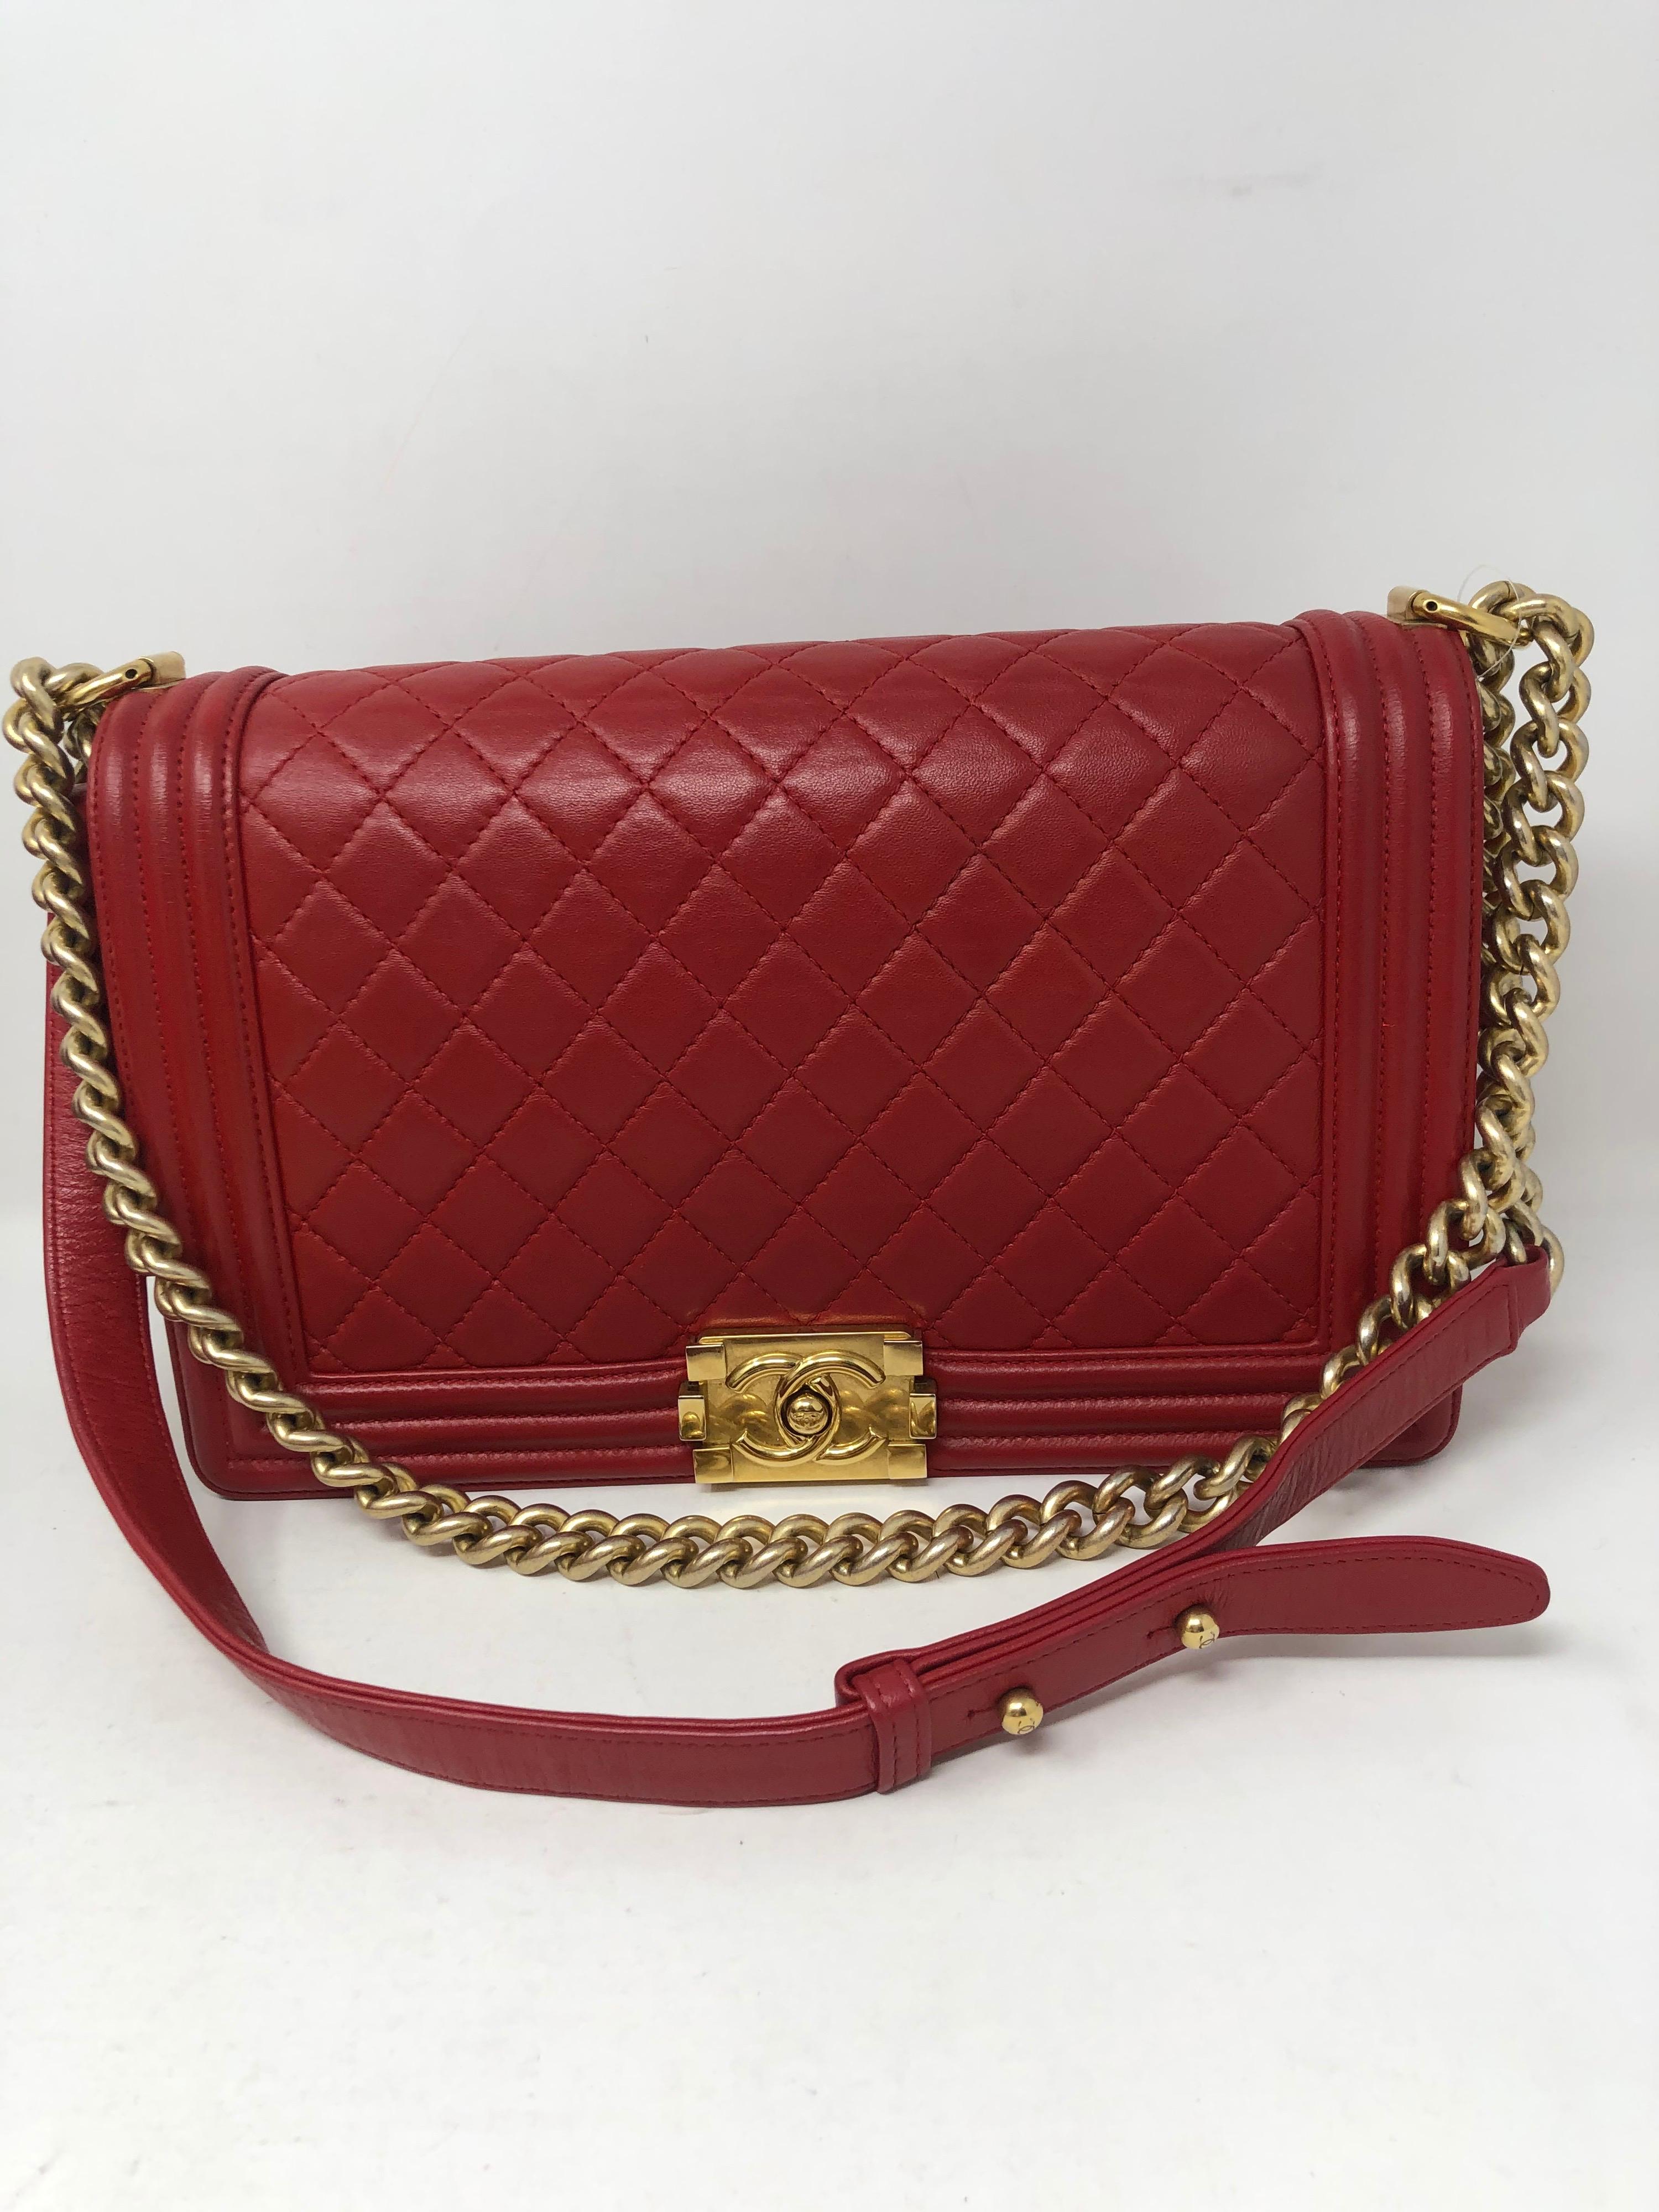 Chanel Red Old Medium Boy Bag. Gold hardware. Lambskin leather. Beautiful true red color. Excellent condition. Hard to find combo. Can be worn crossbody or doubled as a shoulder bag. Serial number intact. Guaranteed authentic. 